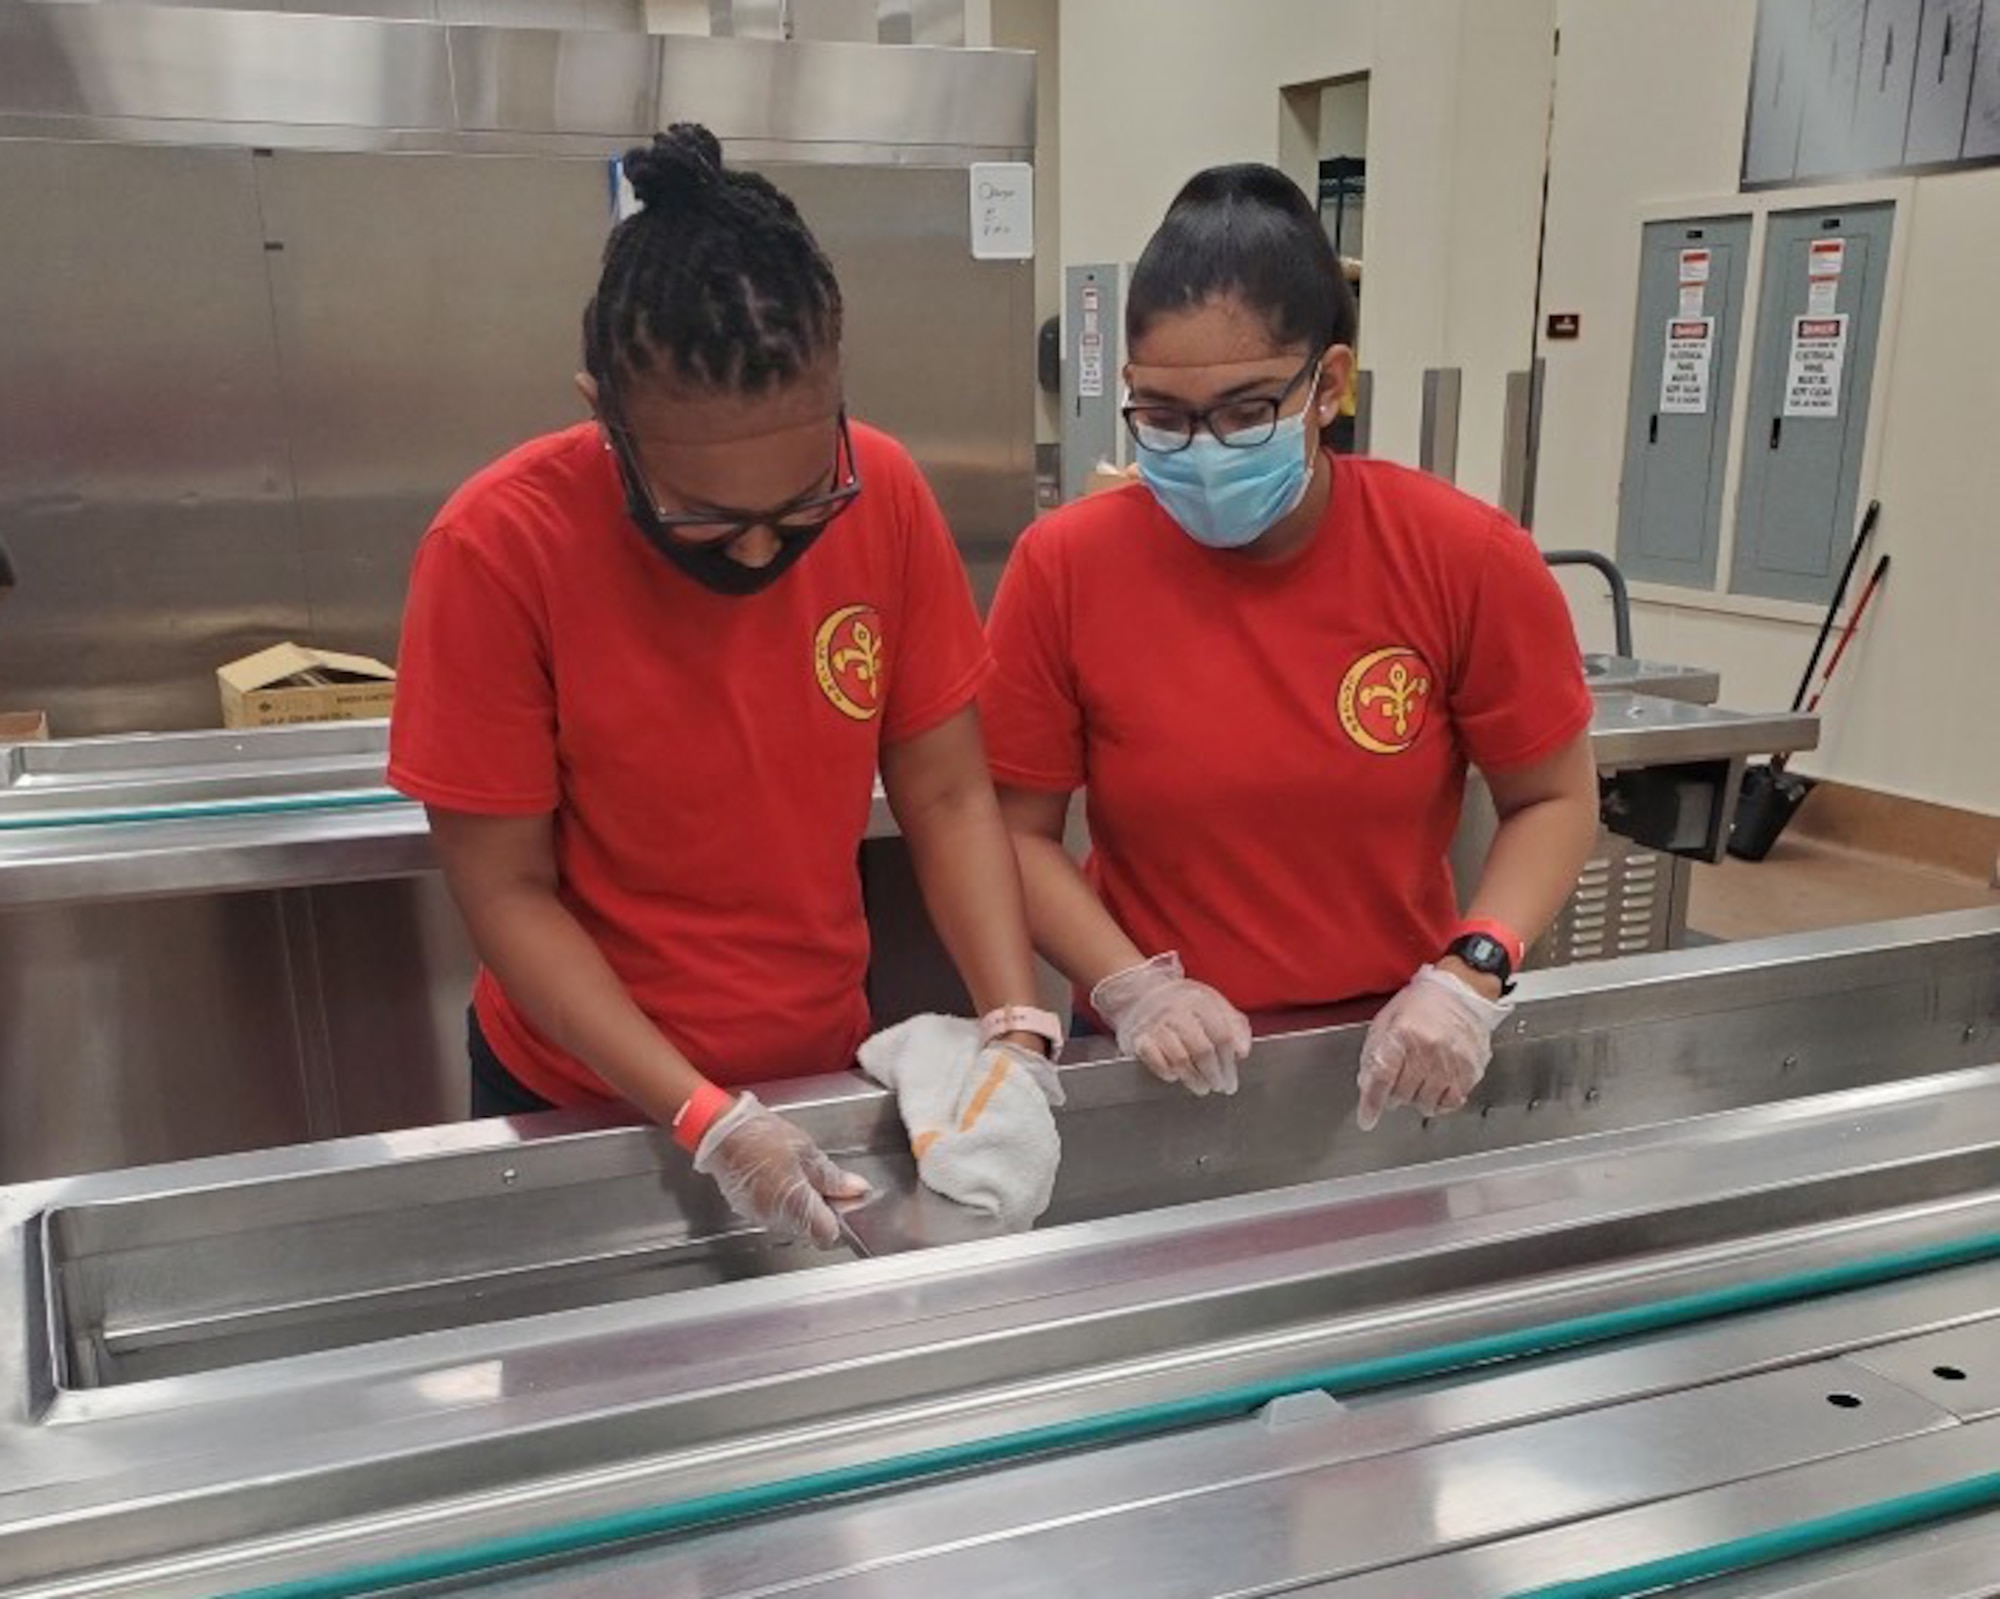 Tech. Sgt. Cassandra Smith and Airman First Class Jasmin Valdez-Ramos, 706th Fighter Squadron, volunteer at a local nonprofit food organization May 27, in Las Vegas, Nevada.